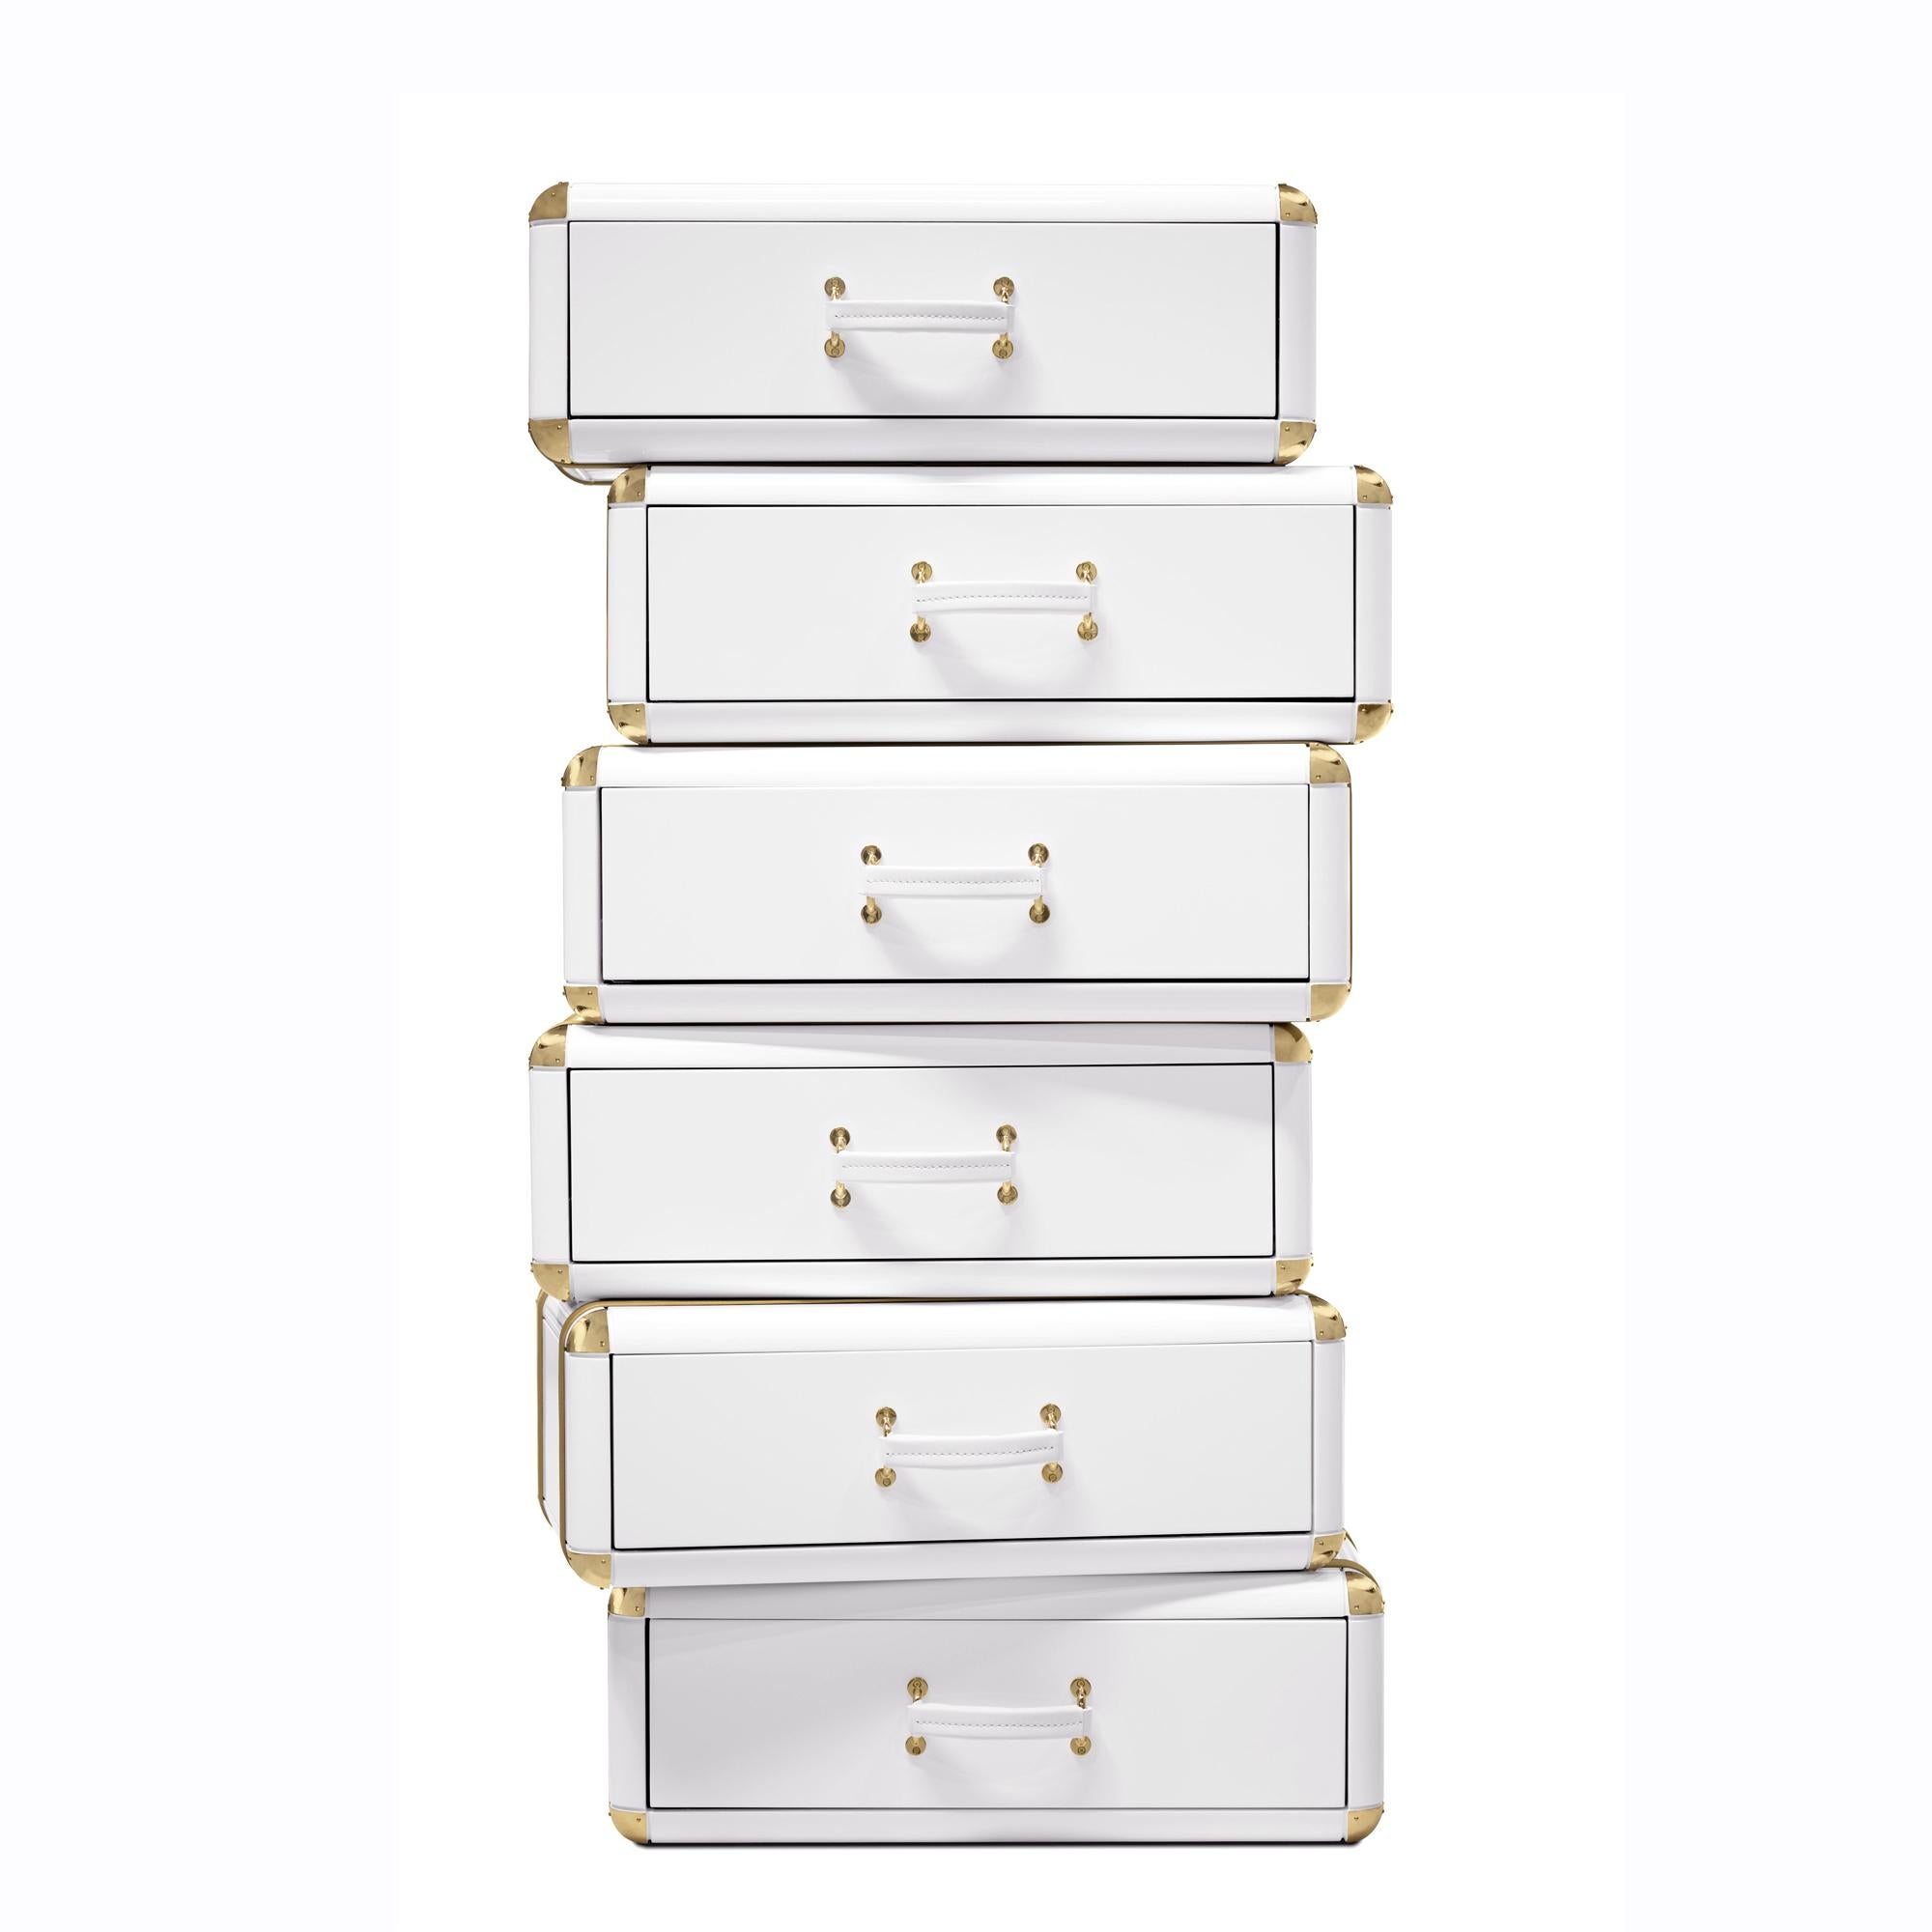 White Flight Case Shelf of 6 Drawers with structure
in solid wood in white lacquered finish. Details in gilt
synthetic leather and in gold plated brass.
Also available with 2 or 3 drawers.